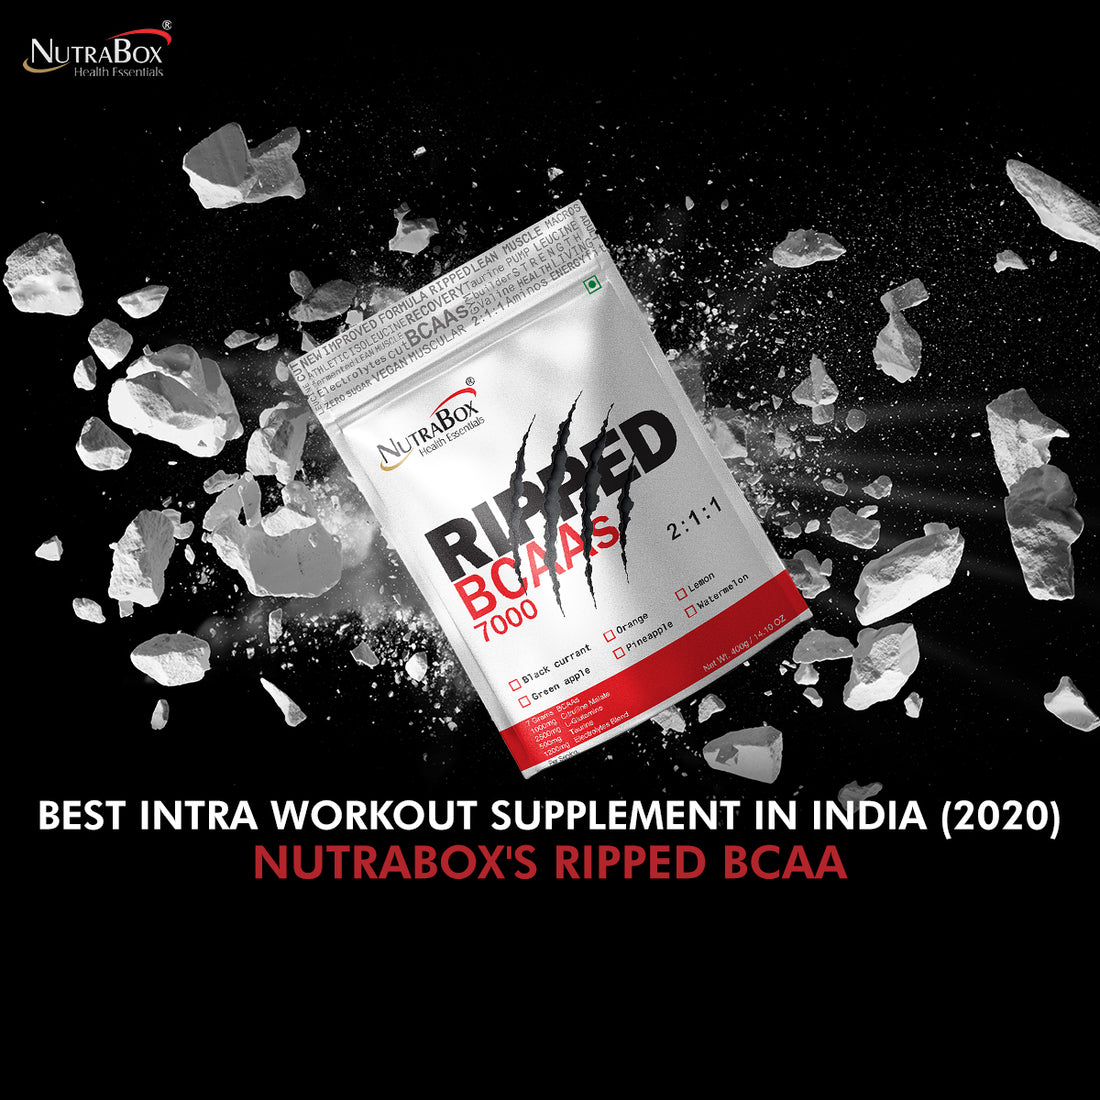 Best Intra Workout Supplements in India - Nutrabox's Ripped BCAA